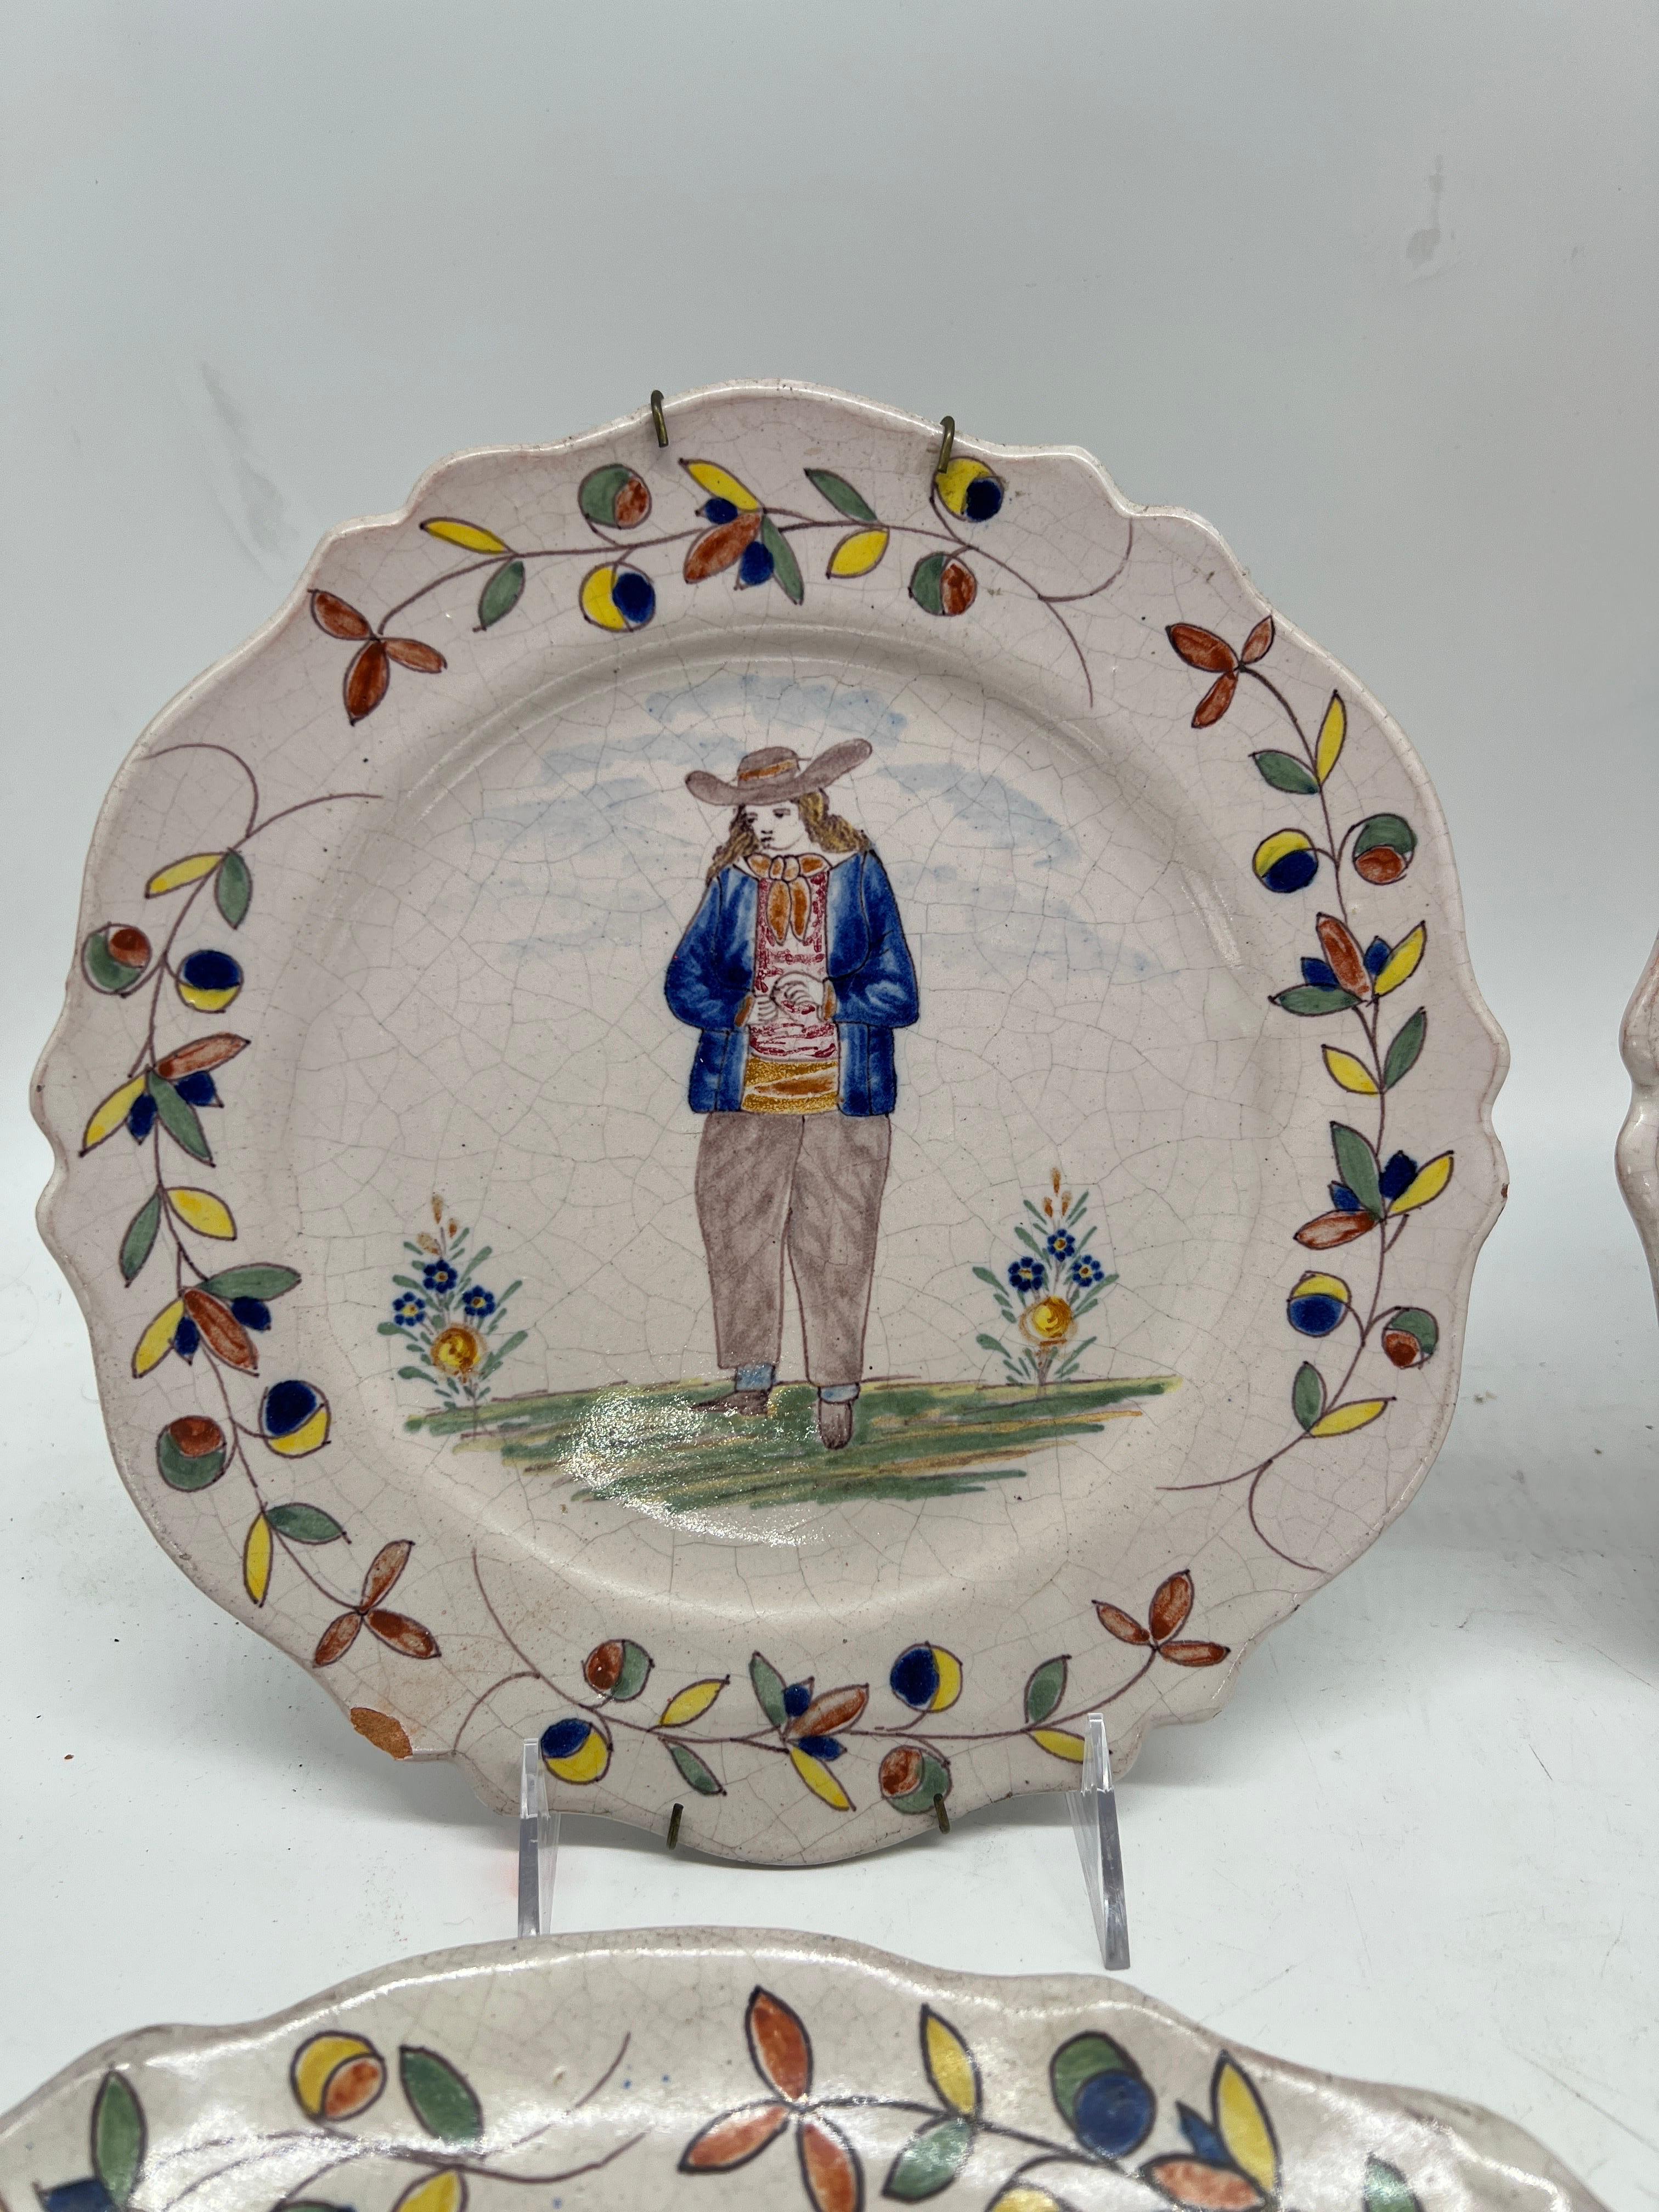 Quimper Pottery, French 20th century.

A collection of 4 vintage Quimper faience pottery plates. Each plate has a hand painted and tin glazed figural surface and accented by a polychrome foliate leaf border. Marked to verso.

Platter: 12.25